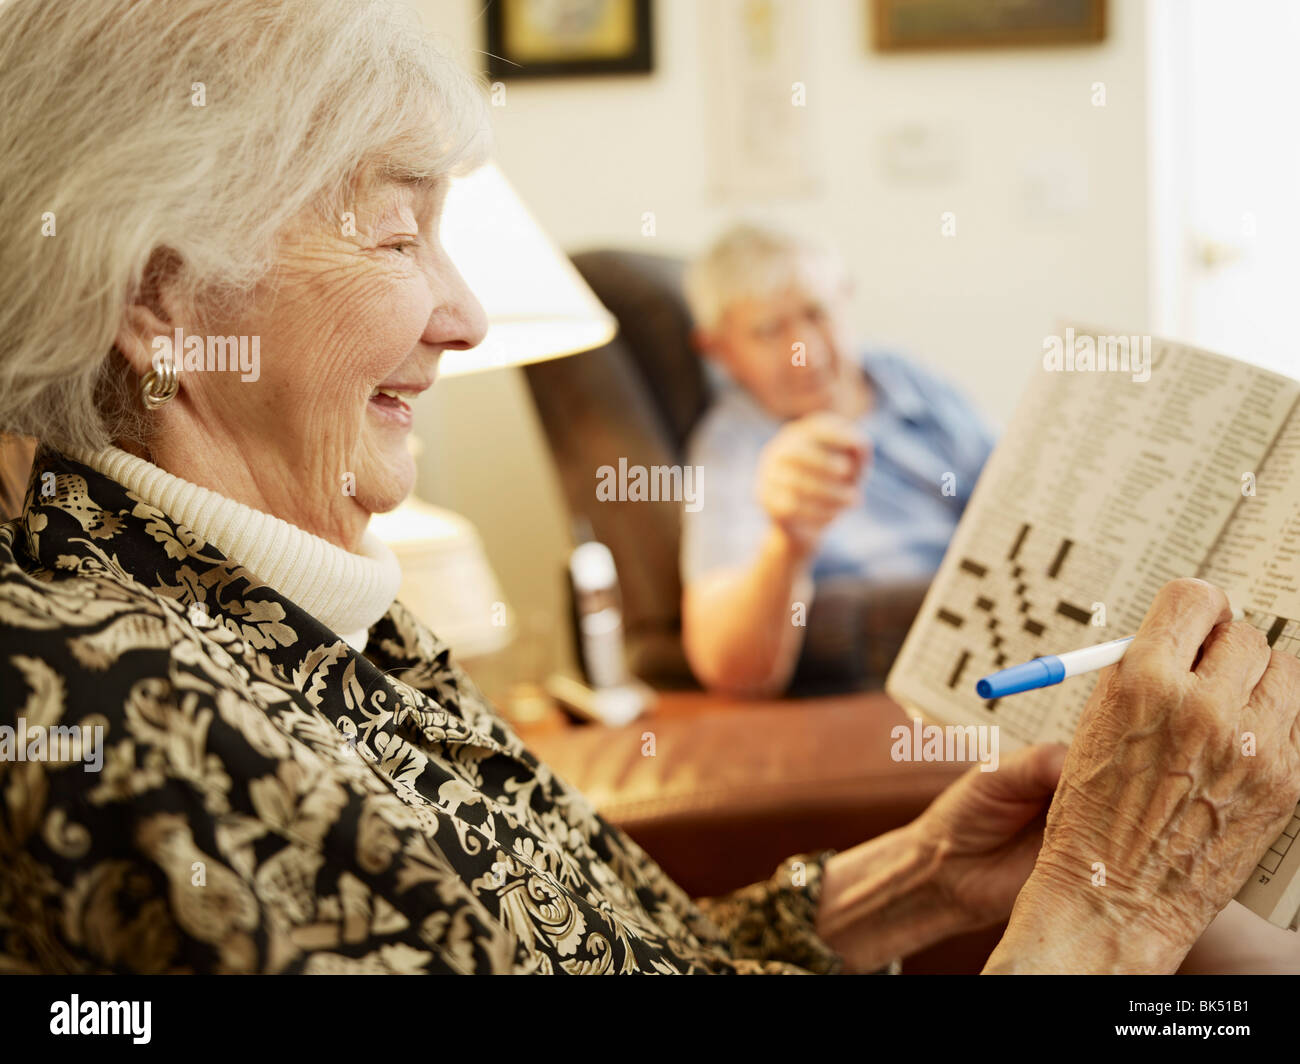 Elderly Couple in Retirement Home, Woman Working on Crossword Puzzle Stock Photo